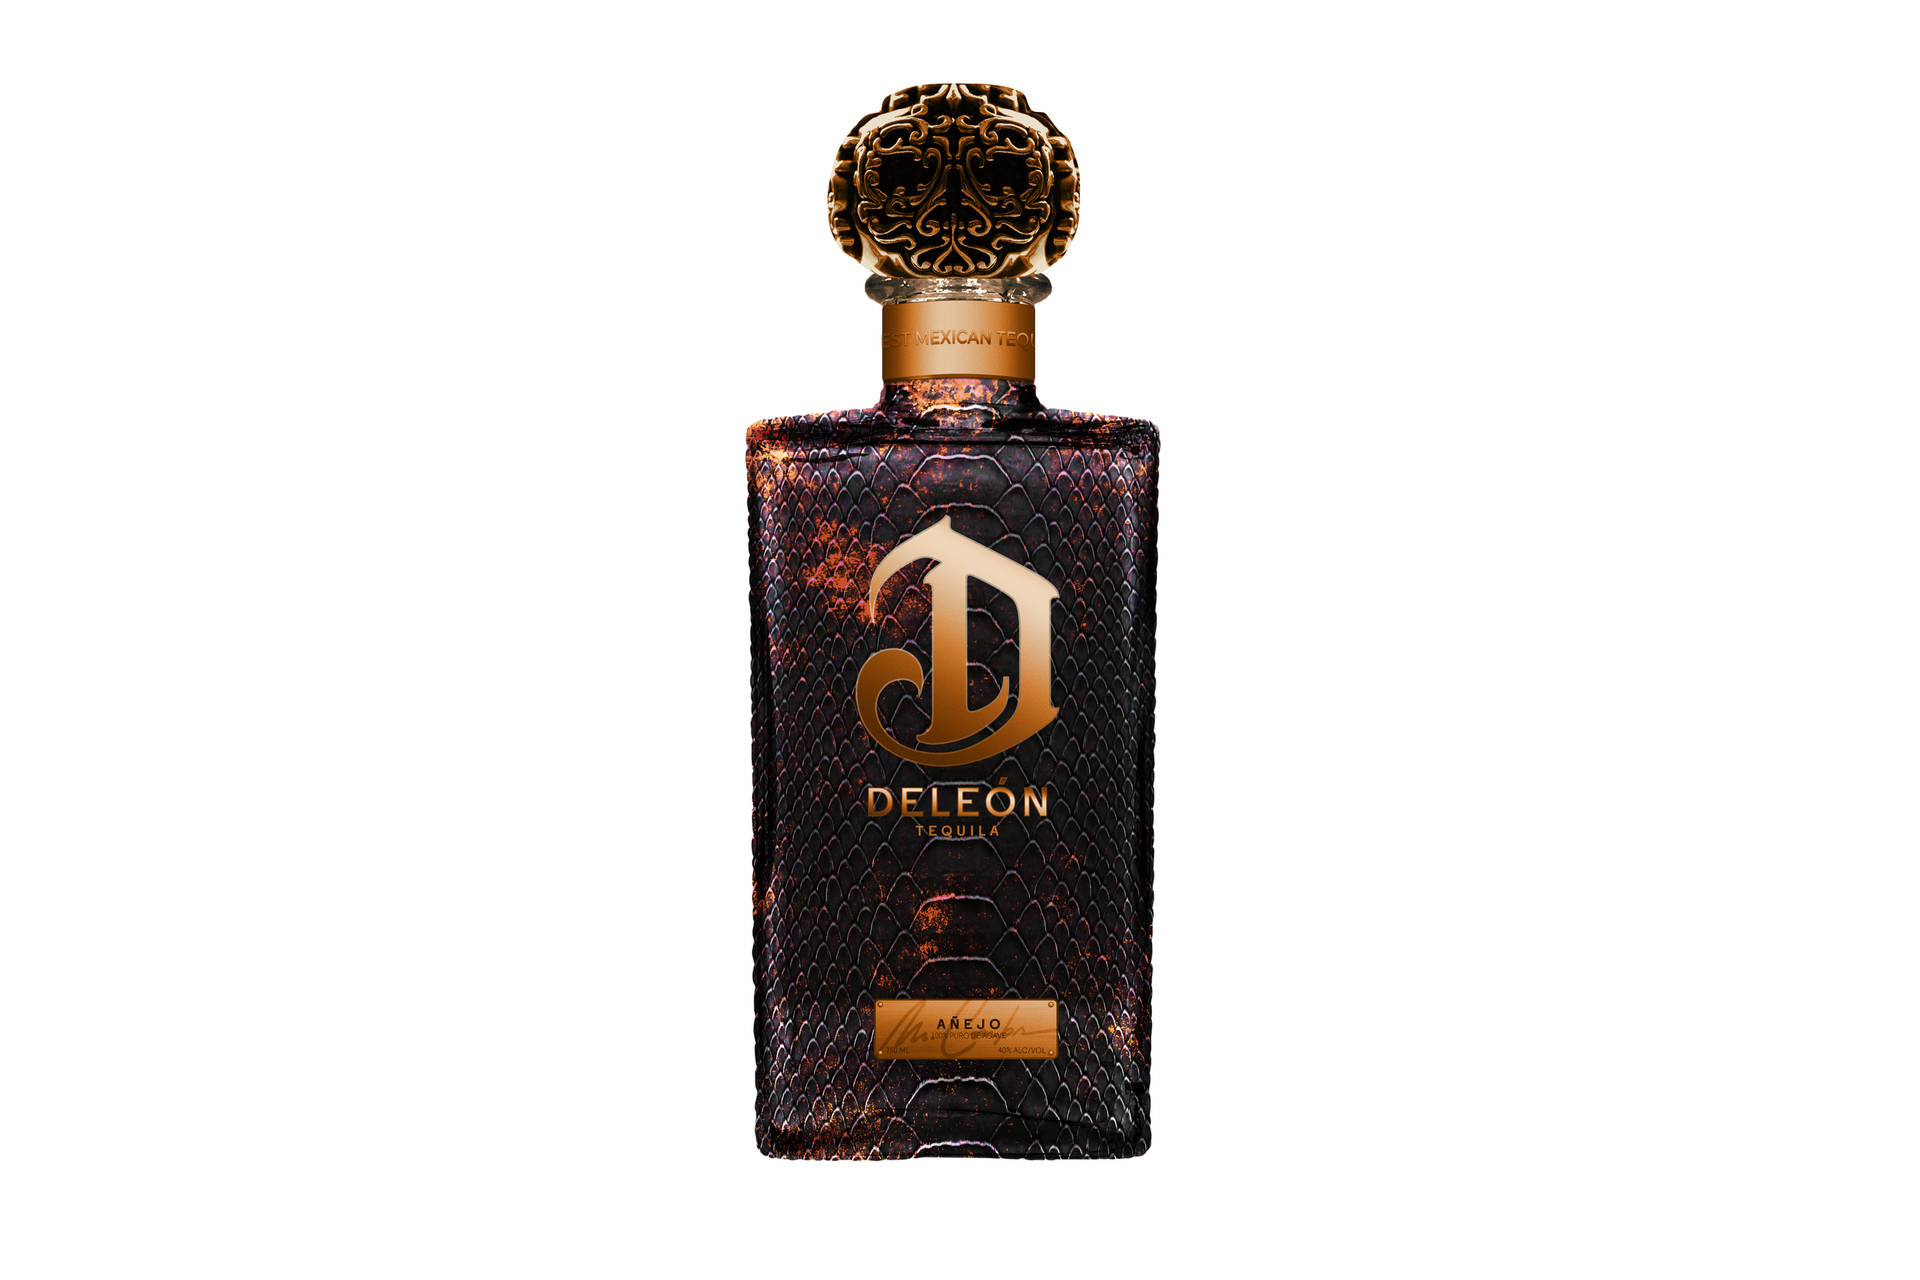 Deleón Tequila Bottle With Leather Skin Picture